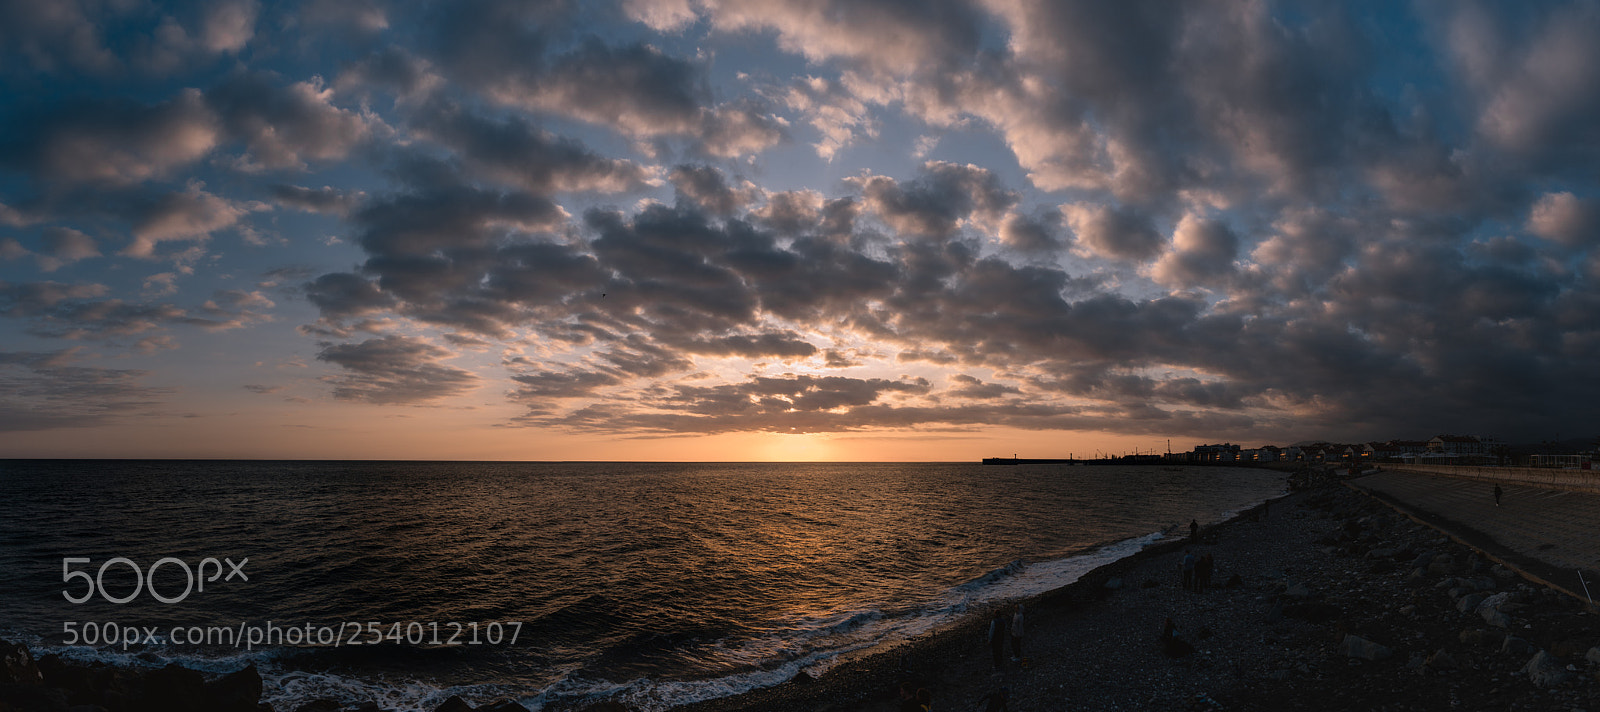 Sony a7 sample photo. Adler cloudy panorama photography